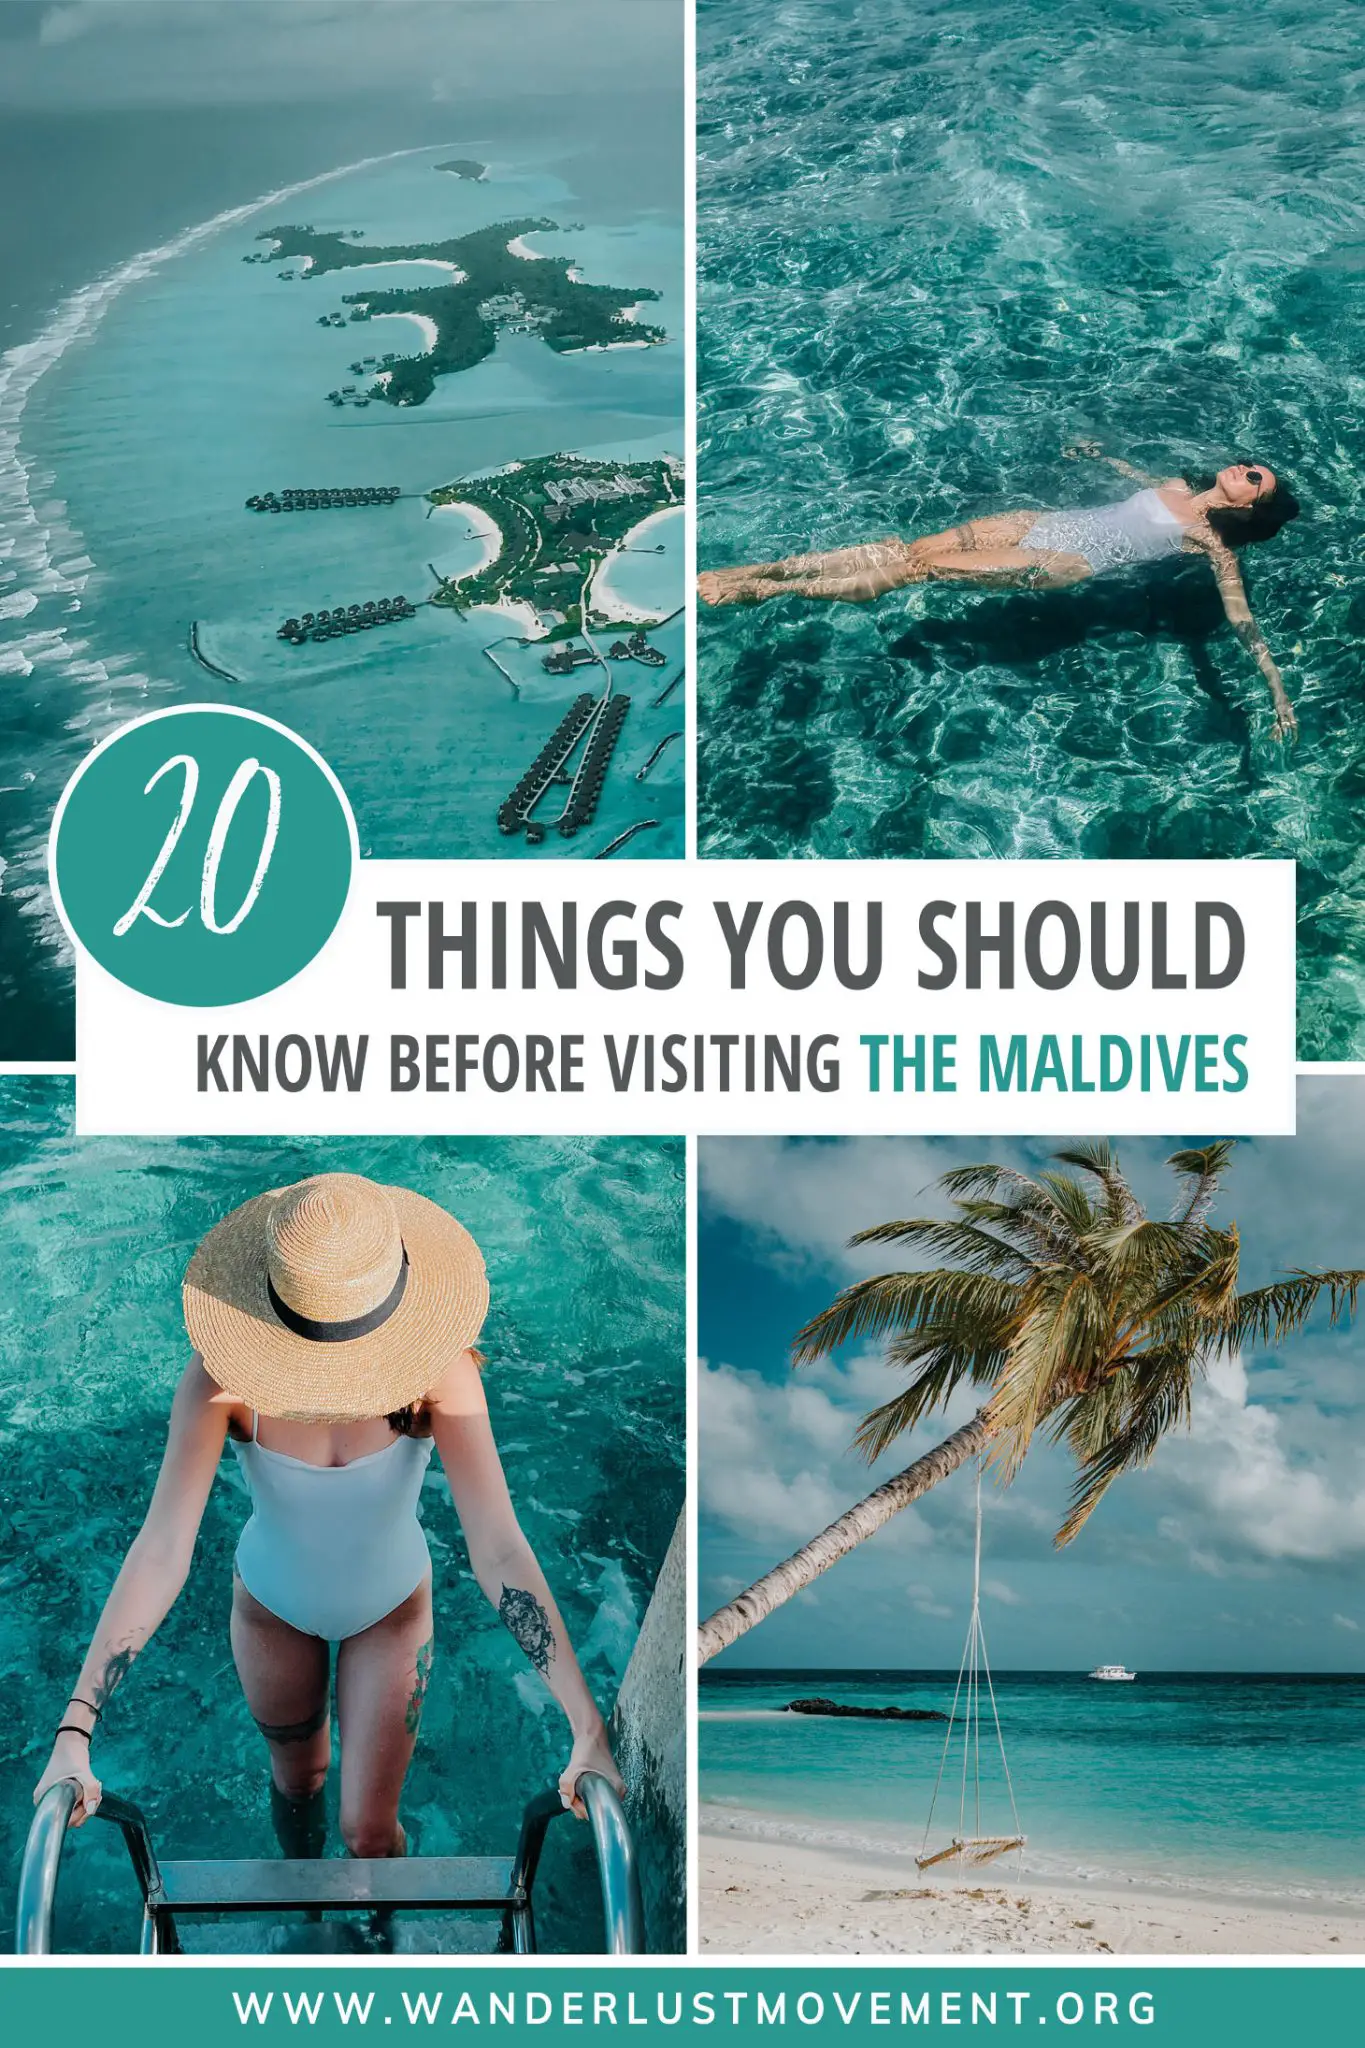 20 Maldives Travel Tips to Plan The Tropical Getaway of Your Dreams